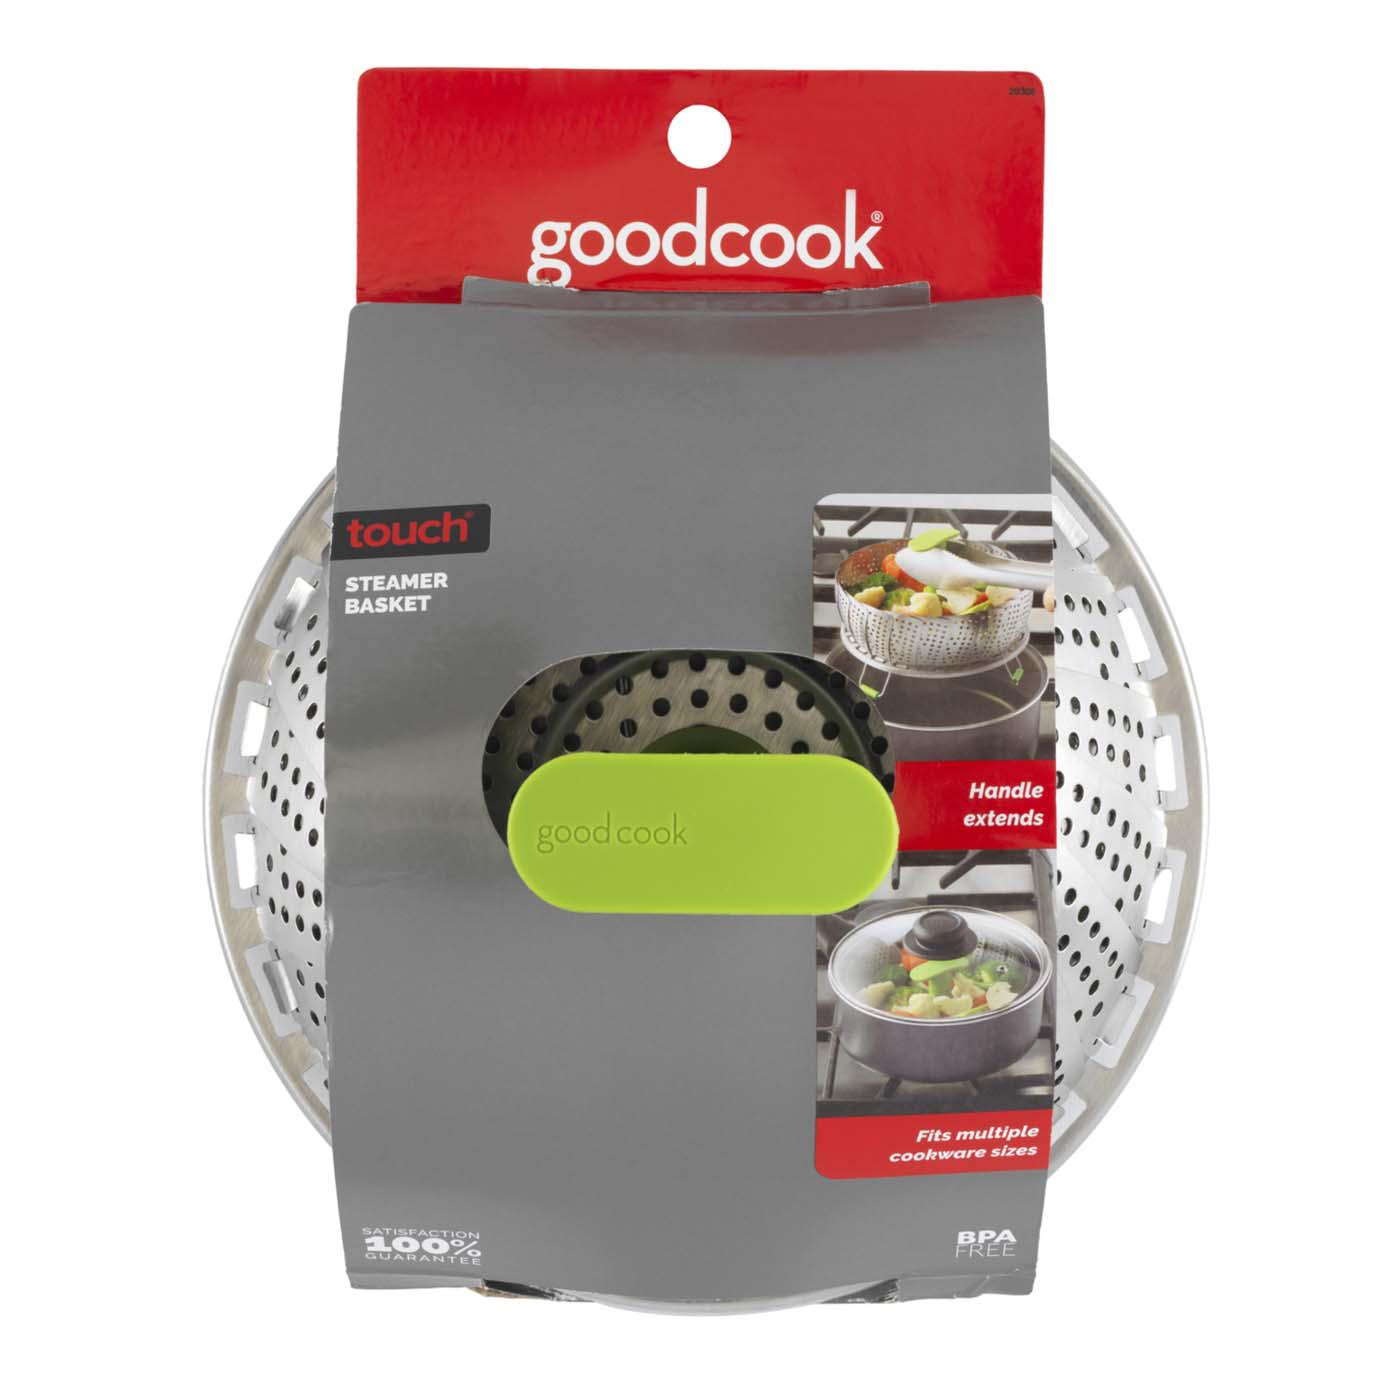 GoodCook Touch Stainless Steel Steamer Basket; image 1 of 5